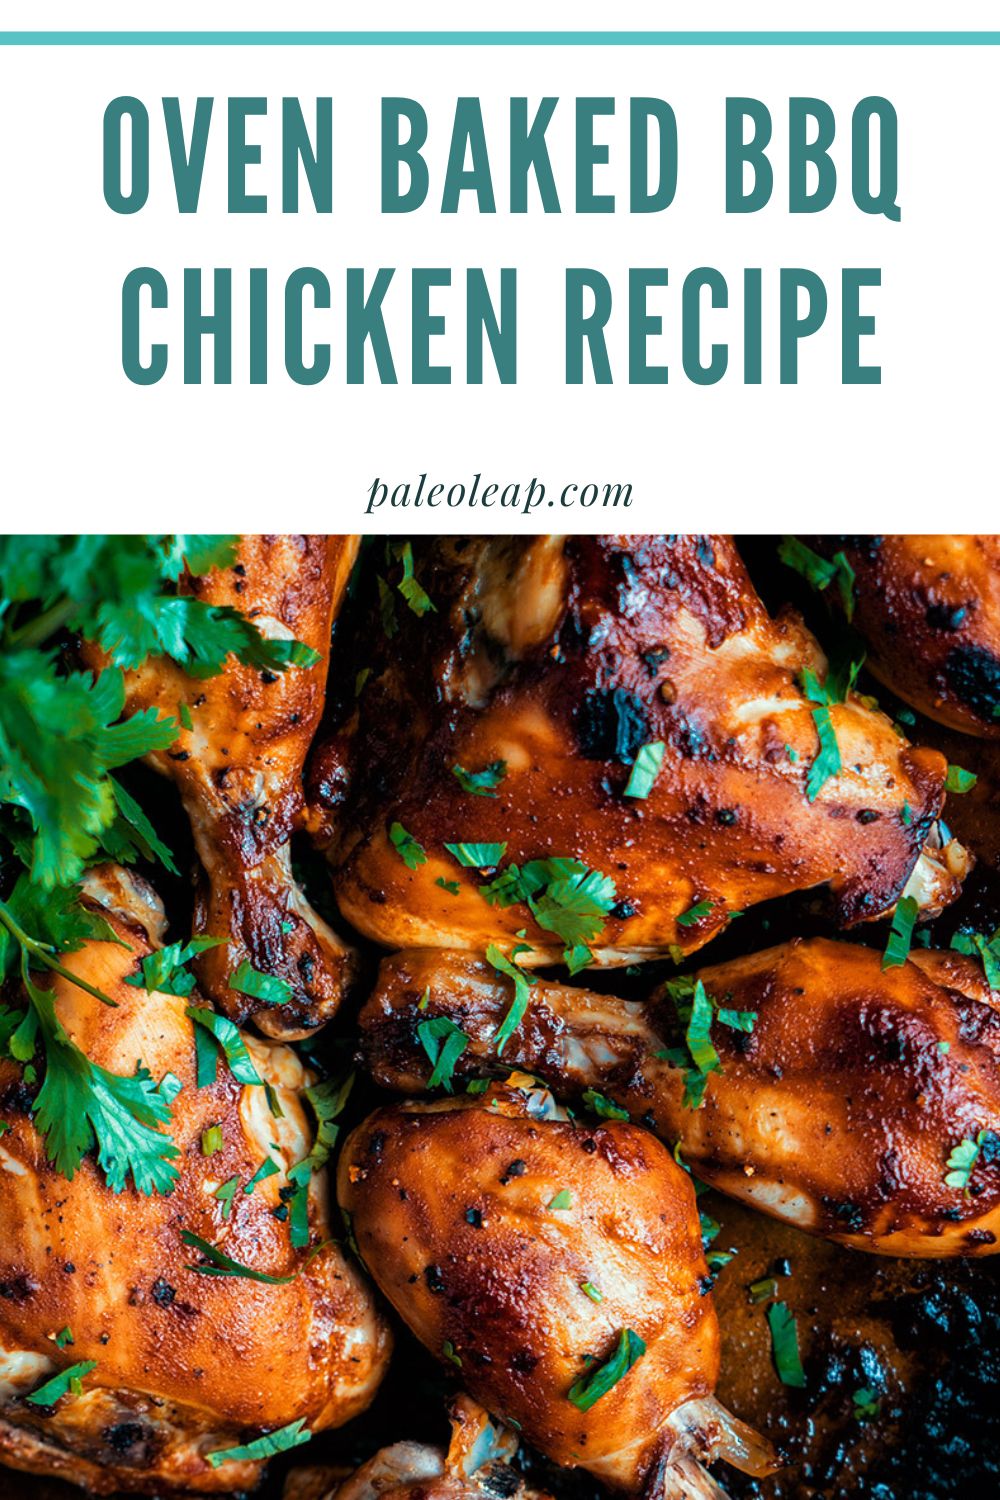 Oven Baked BBQ Chicken Recipe | Paleo Leap